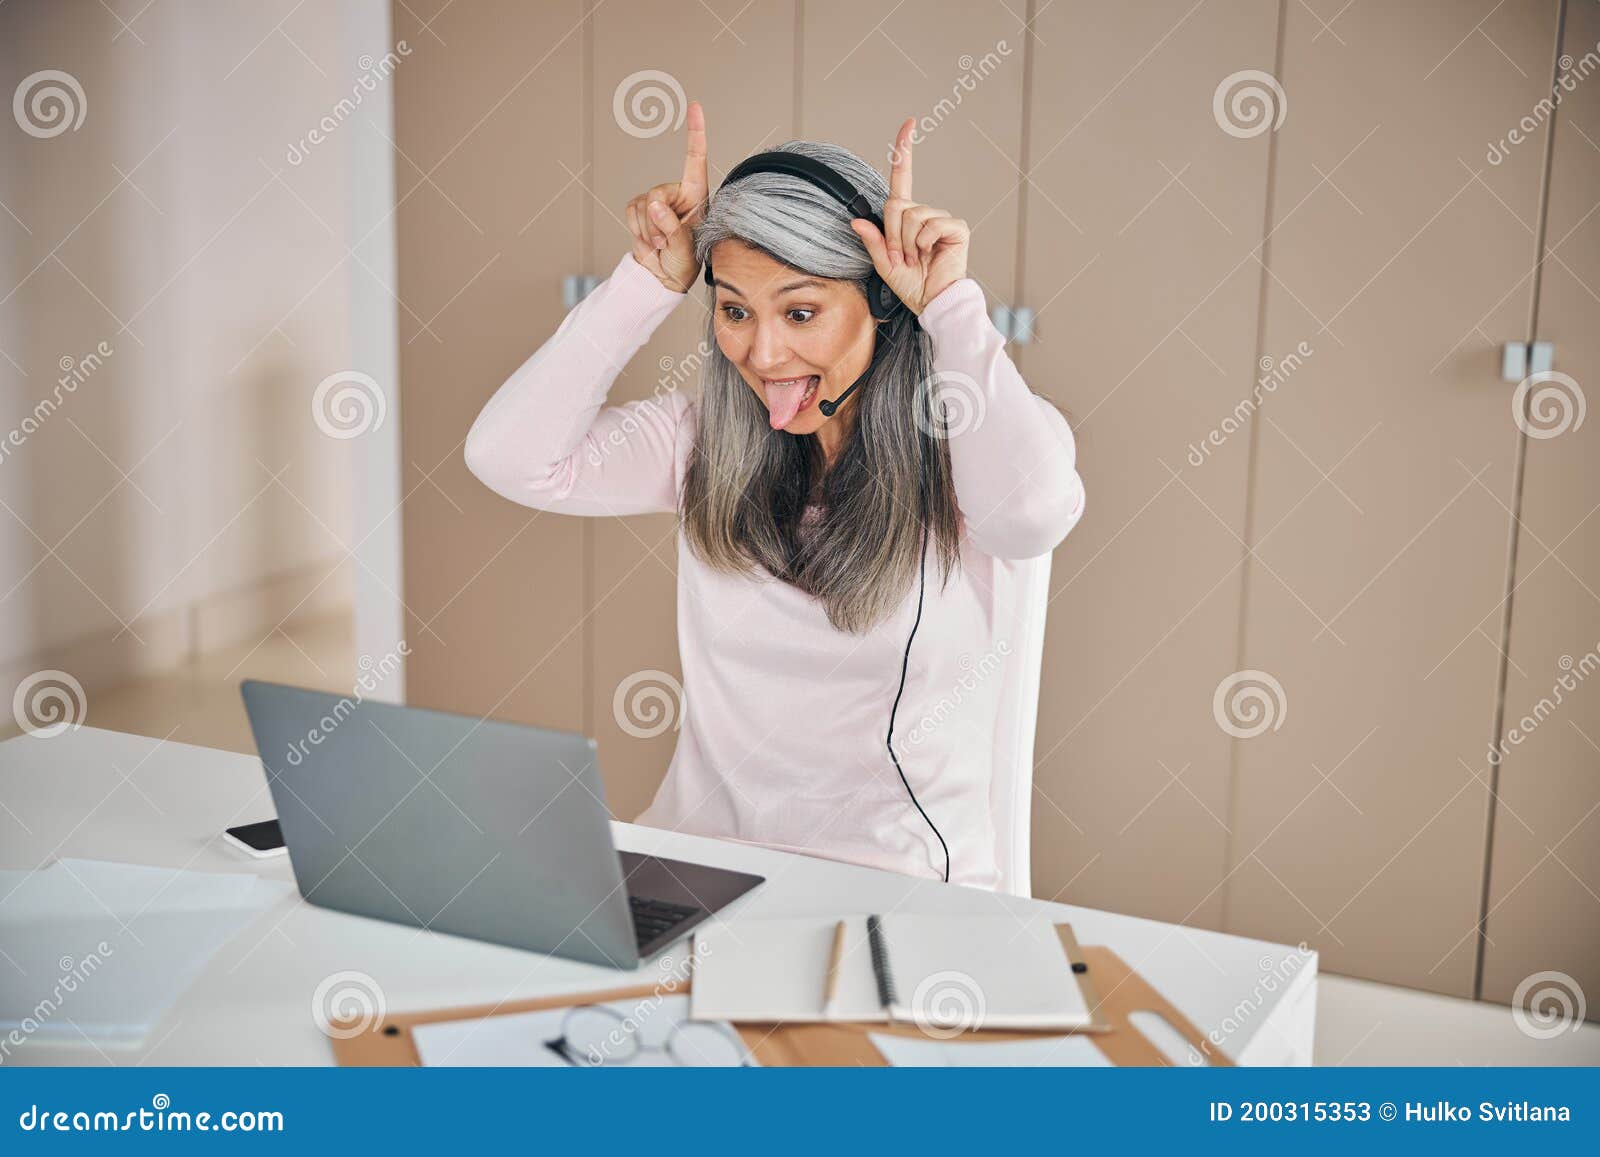 Funny Woman Teacher Conducting Lessons on Video Call with Children Stock  Image - Image of class, communication: 200315353